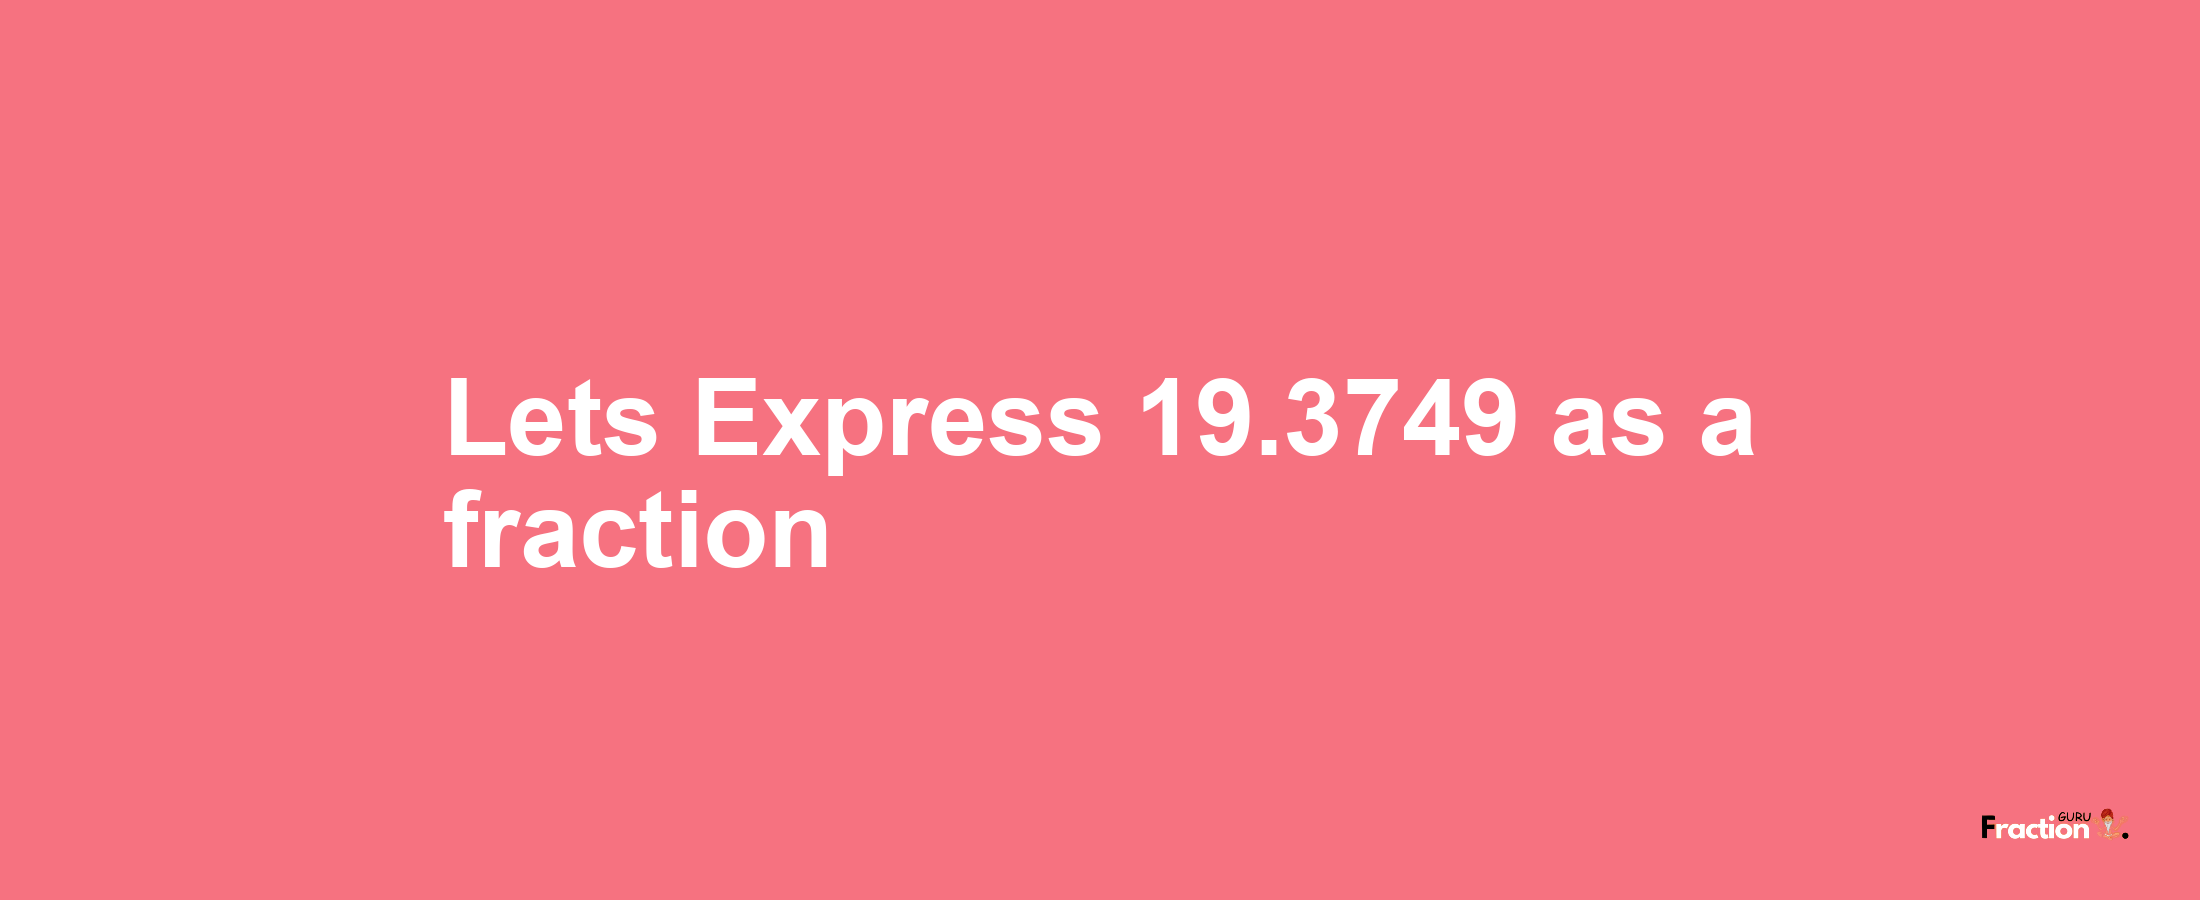 Lets Express 19.3749 as afraction